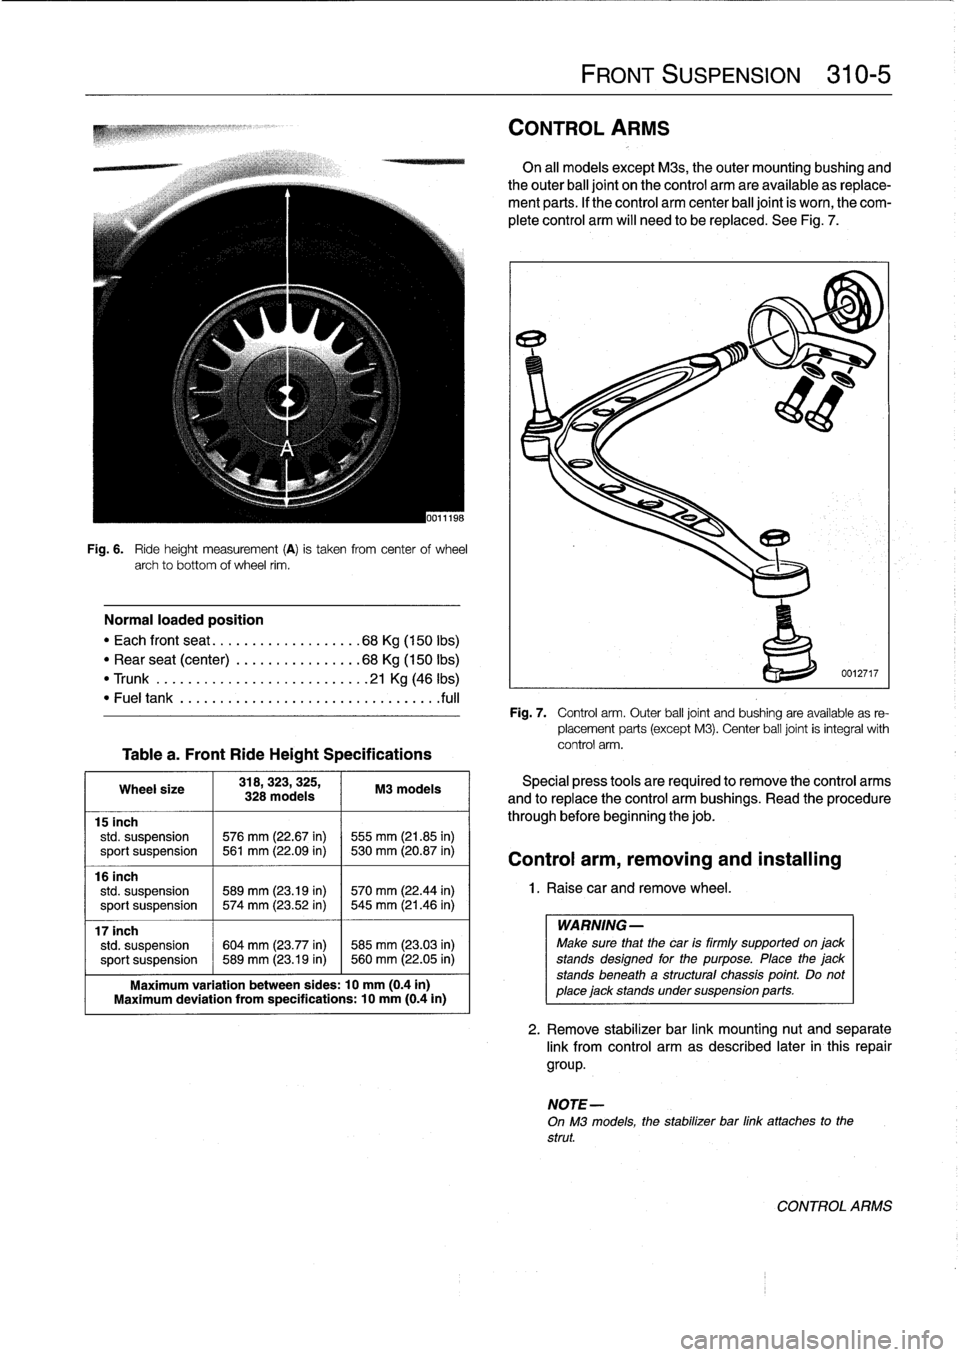 BMW 323i 1997 E36 Workshop Manual 
Fig
.
6
.

	

Ride
height
measurement
(A)
is
taken
from
centerof
wheel
archto
bottom
of
wheel
rim
.

Normal
loaded
position

"
Each
front
seat
...
...
.
..
..........
68Kg
(150
Ibs)

"
Rear
seat
(cen